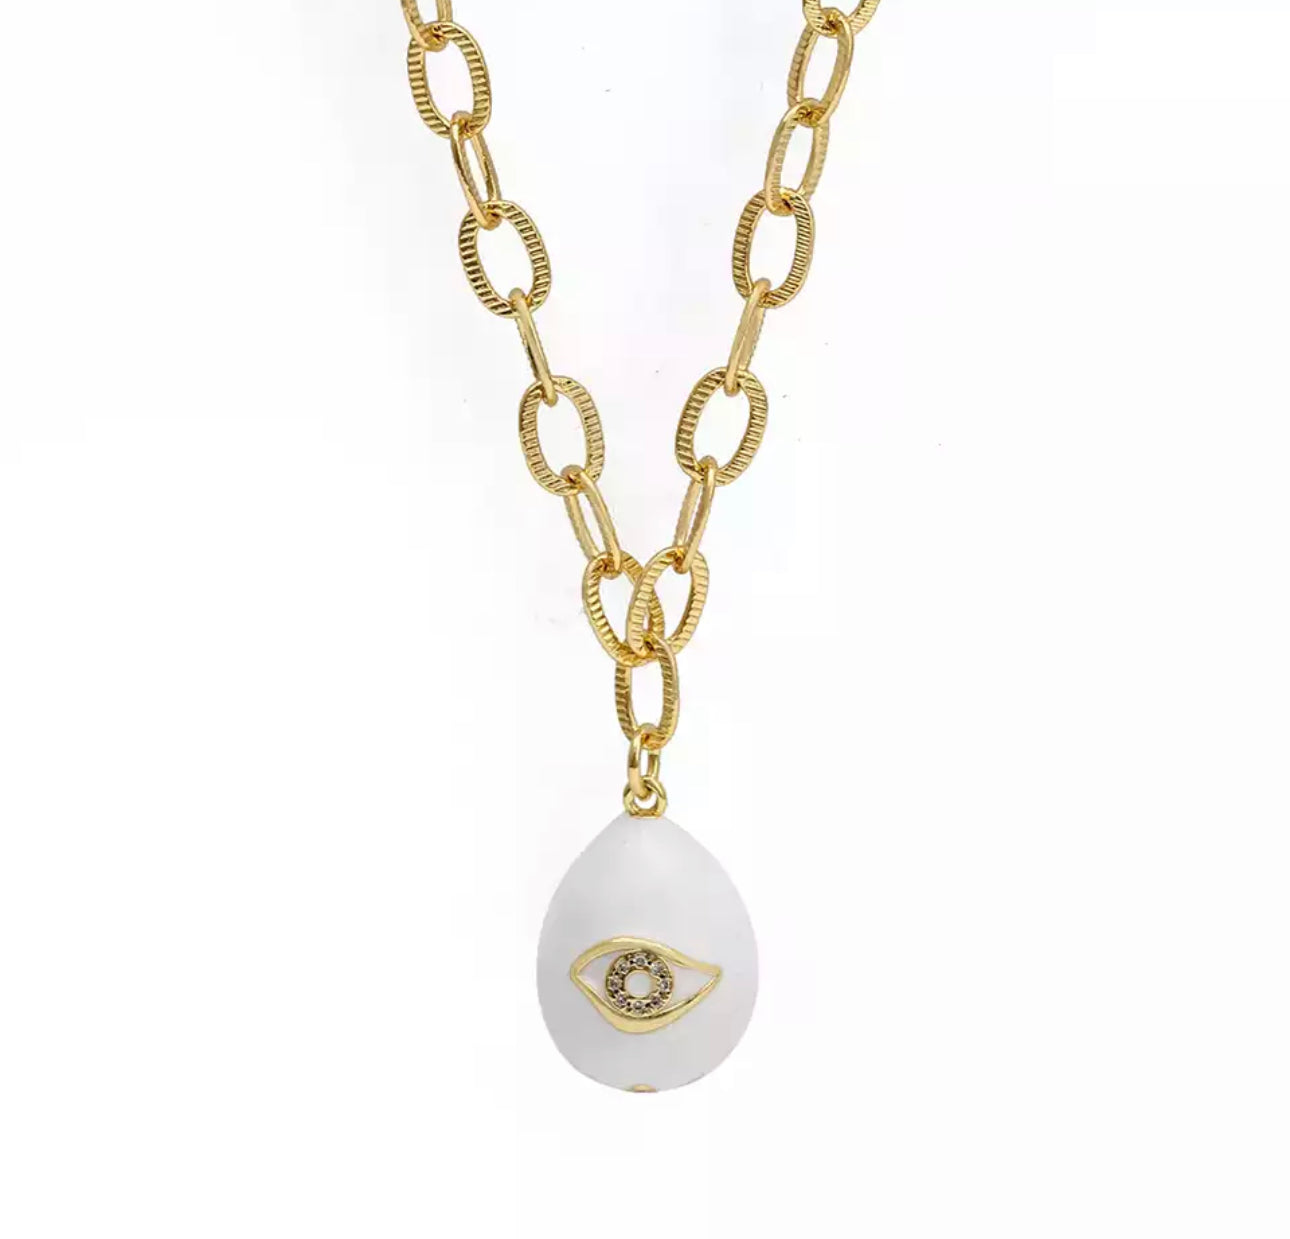 chain link with white evil eye pendant